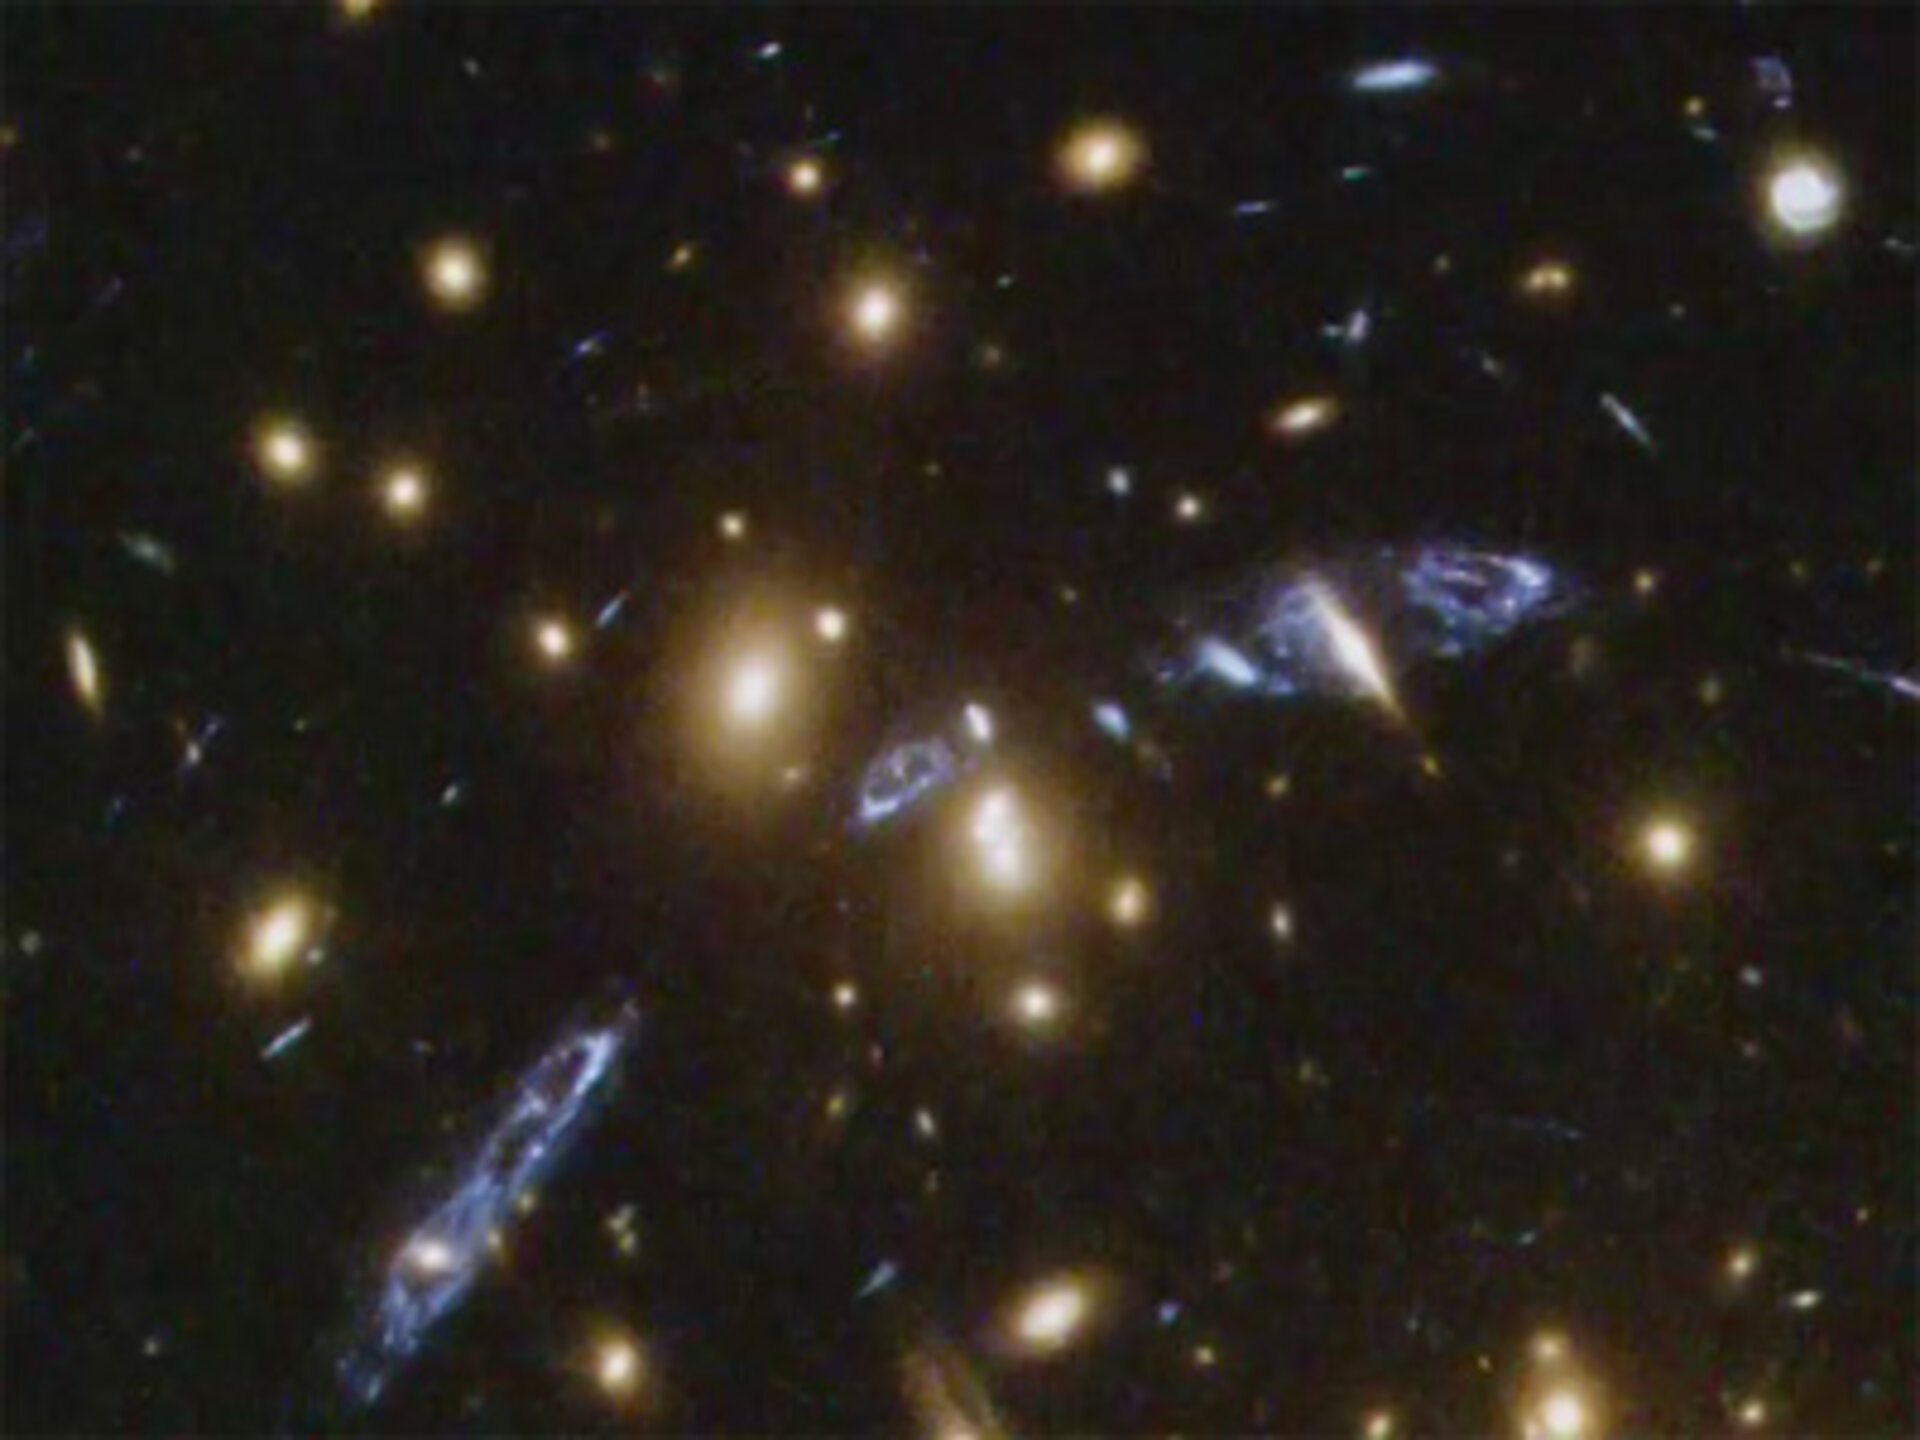 Panning on the galaxy cluster